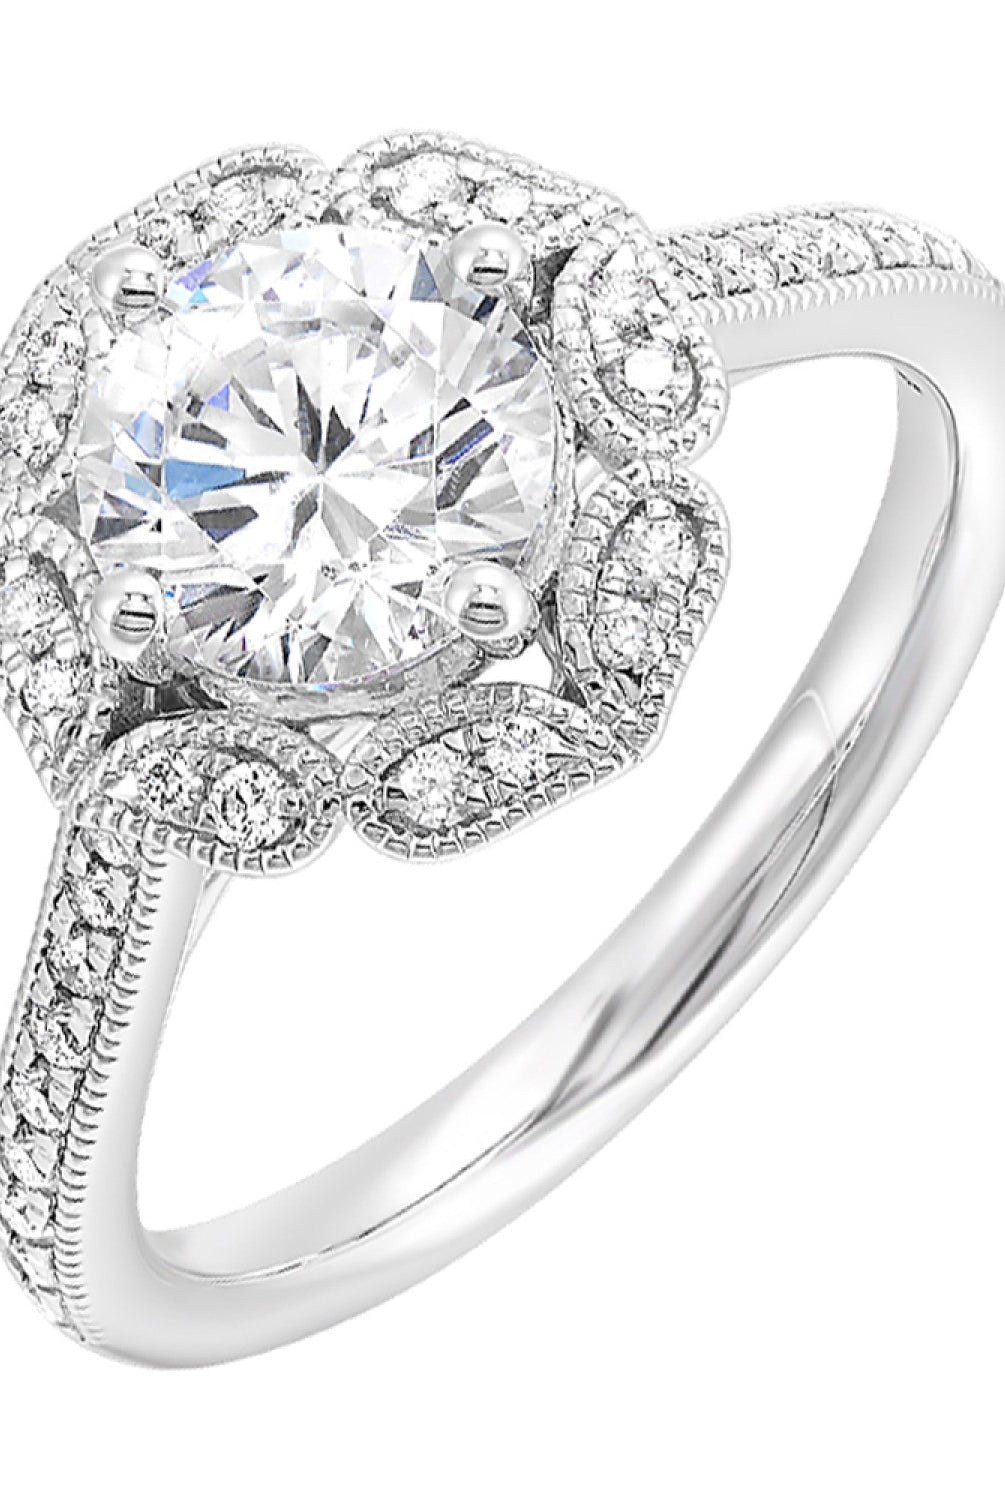 14KW Semi-Mount Halo Style Engagement Ring with Diamonds 1/4 CTW